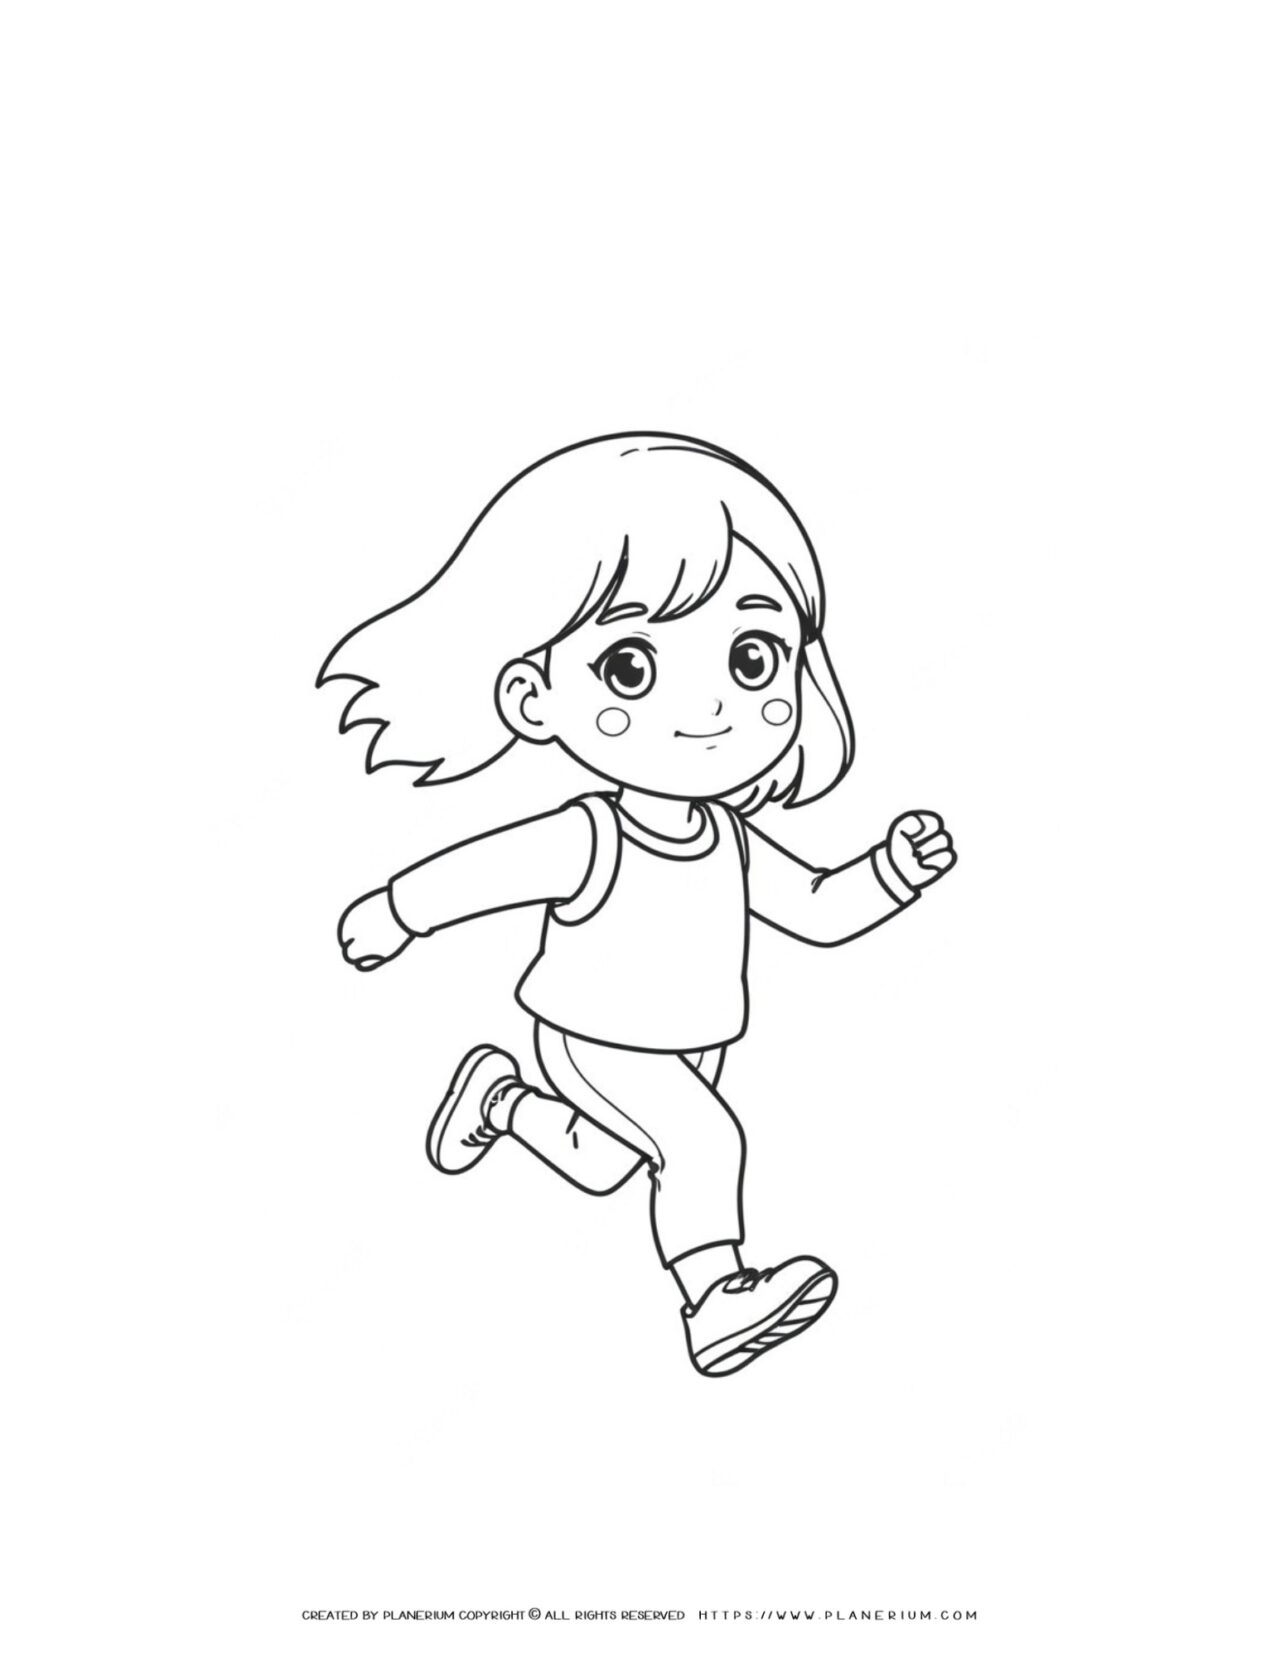 little-girl-running-simple-coloring-page-for-kids